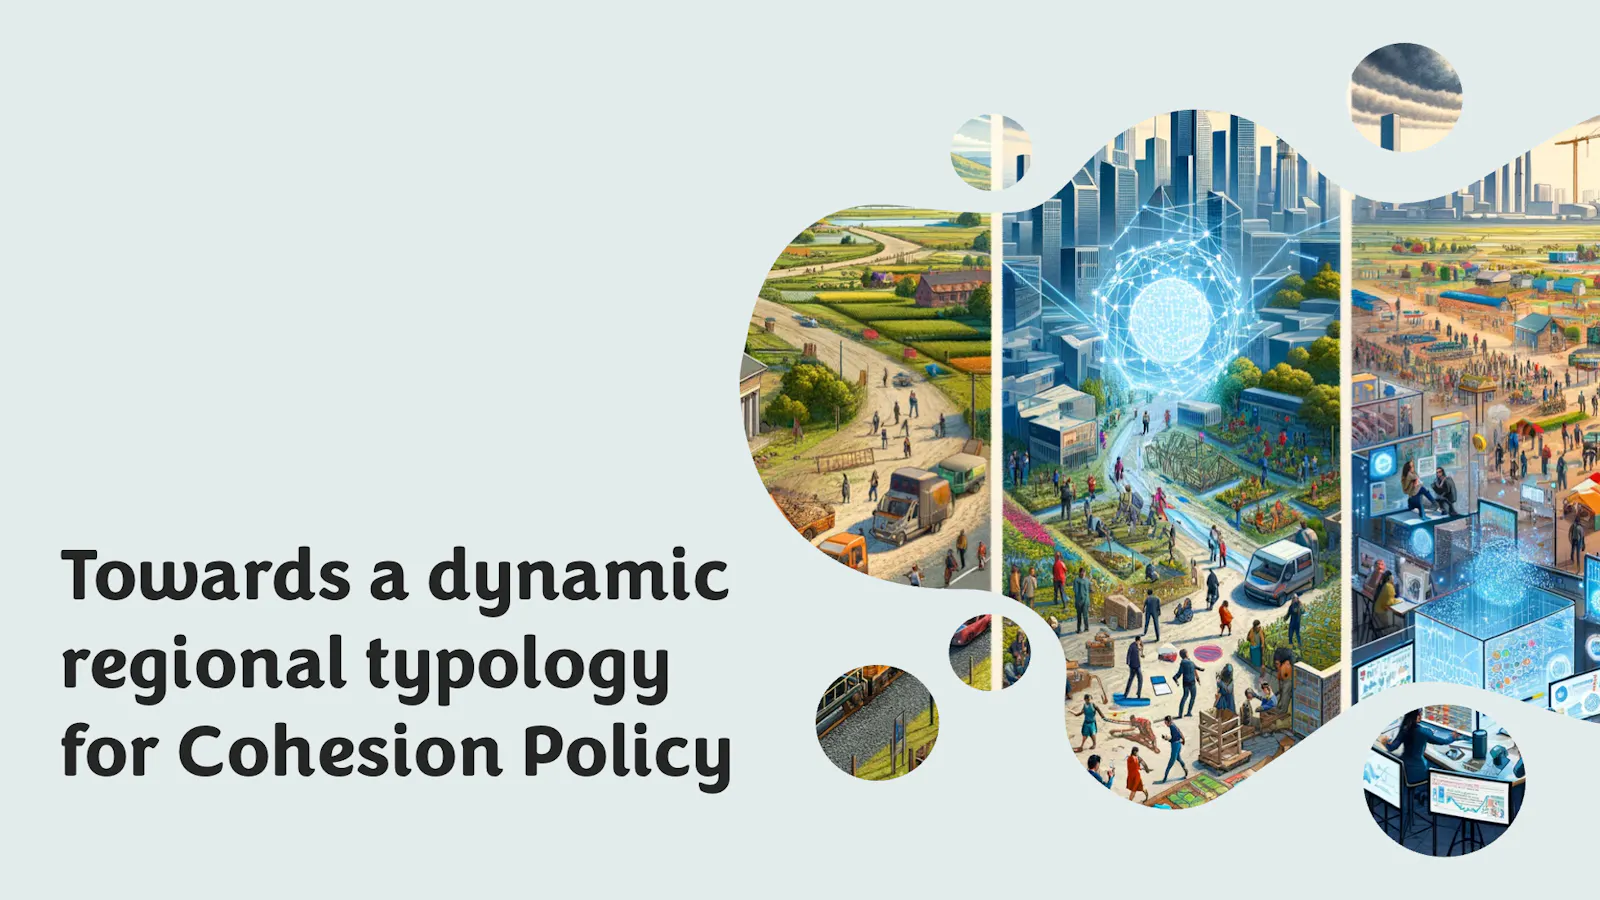 Towards a more dynamic typology of regions for Cohesion Policy